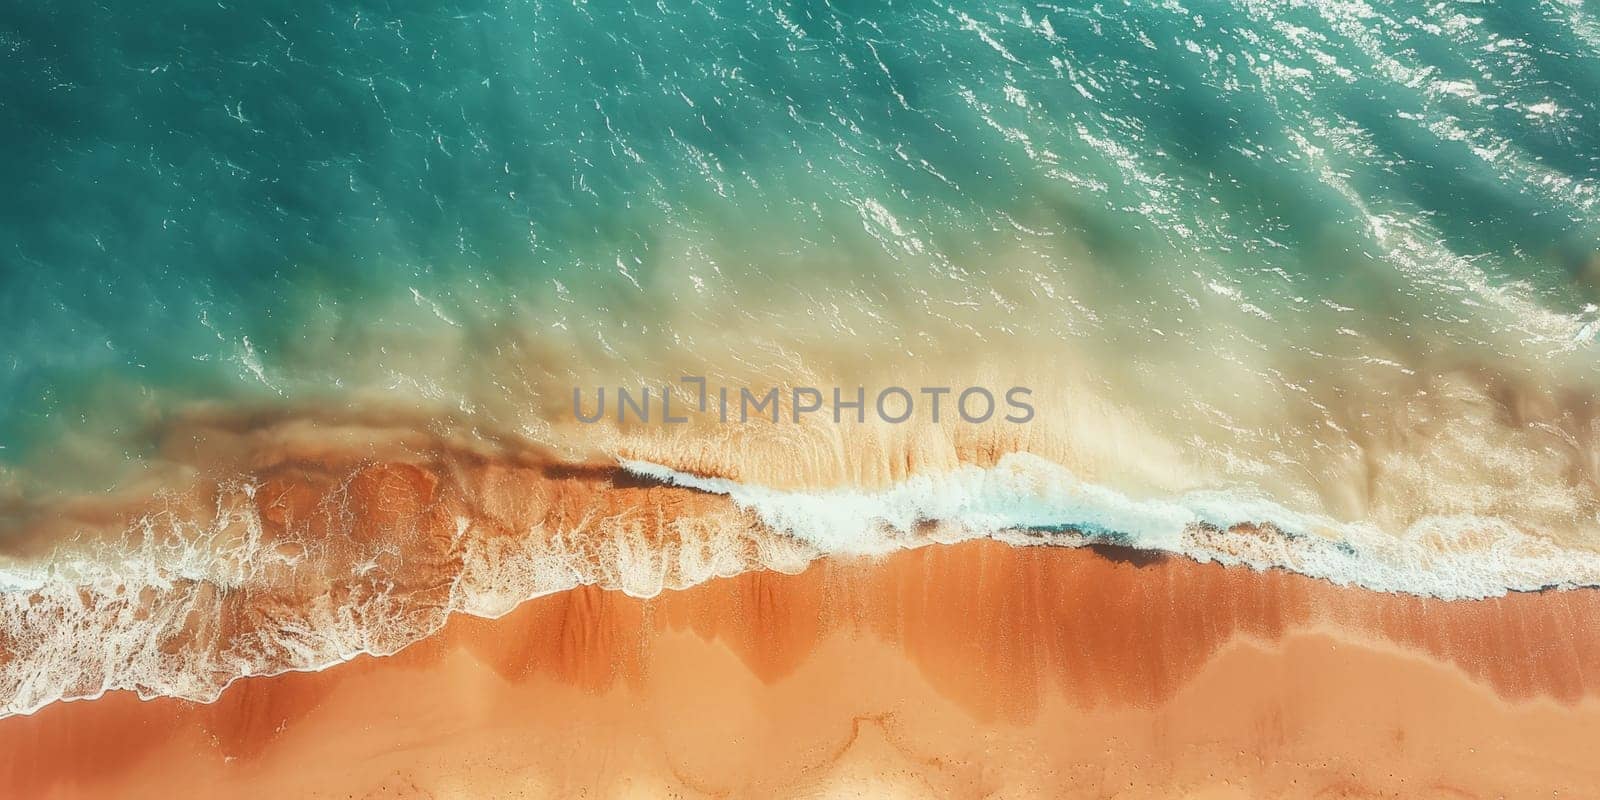 The ocean is calm and the water is a beautiful blue color. The sand is a warm orange color